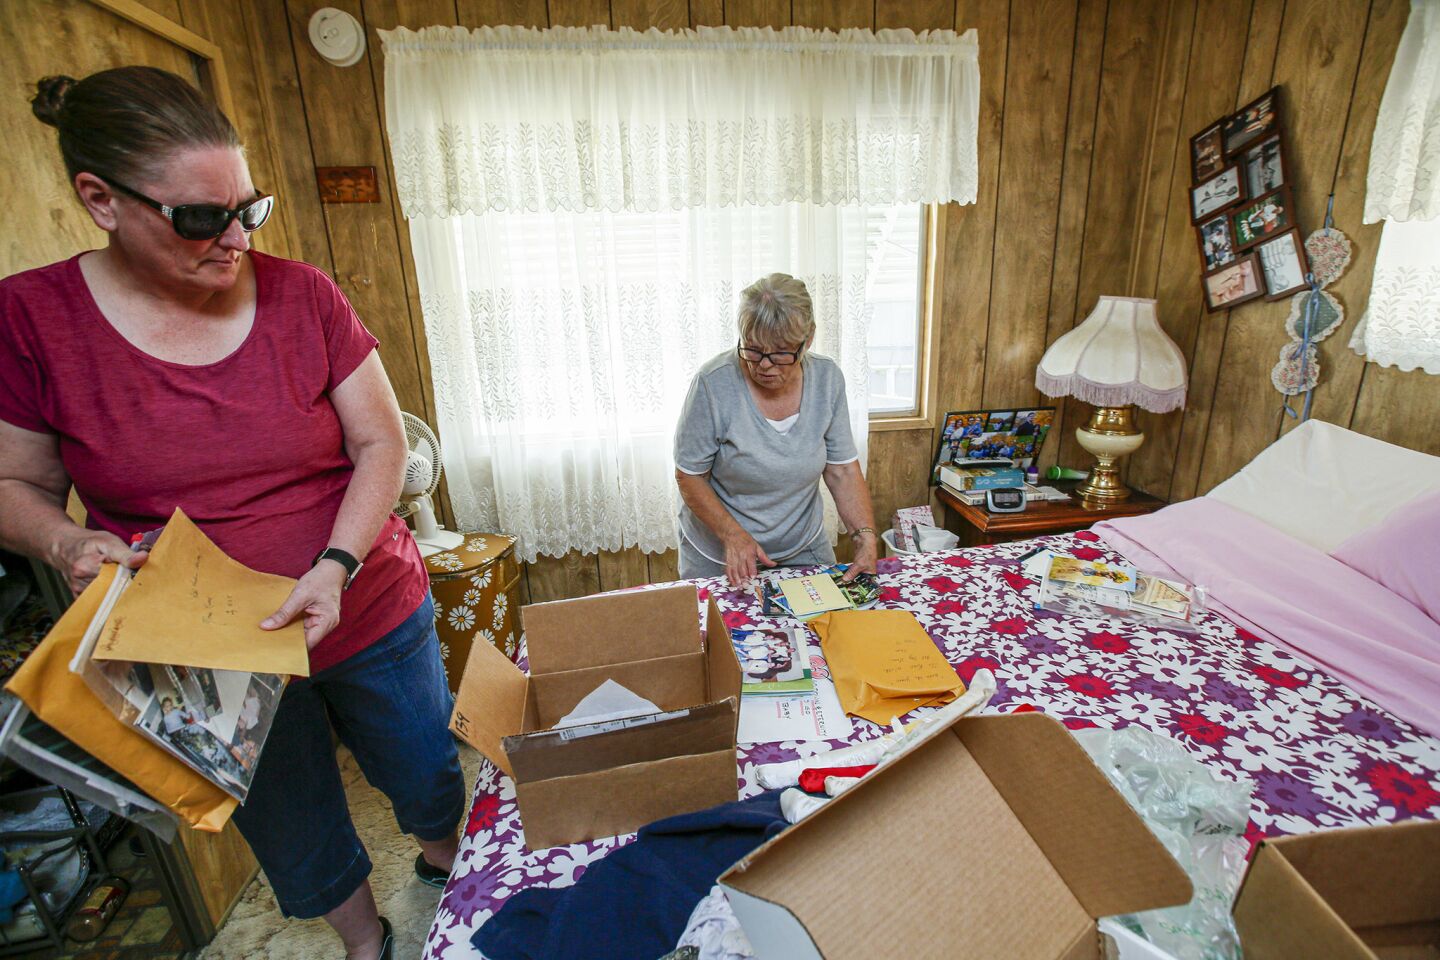 Susan Manson, 53, left, helps her mother Charlotte Sturgeon, 78, retrieve photos and important documents from Sturgeon's red-tagged mobile home at Torusdale Estates on Ward Avenue in Ridgecrest.